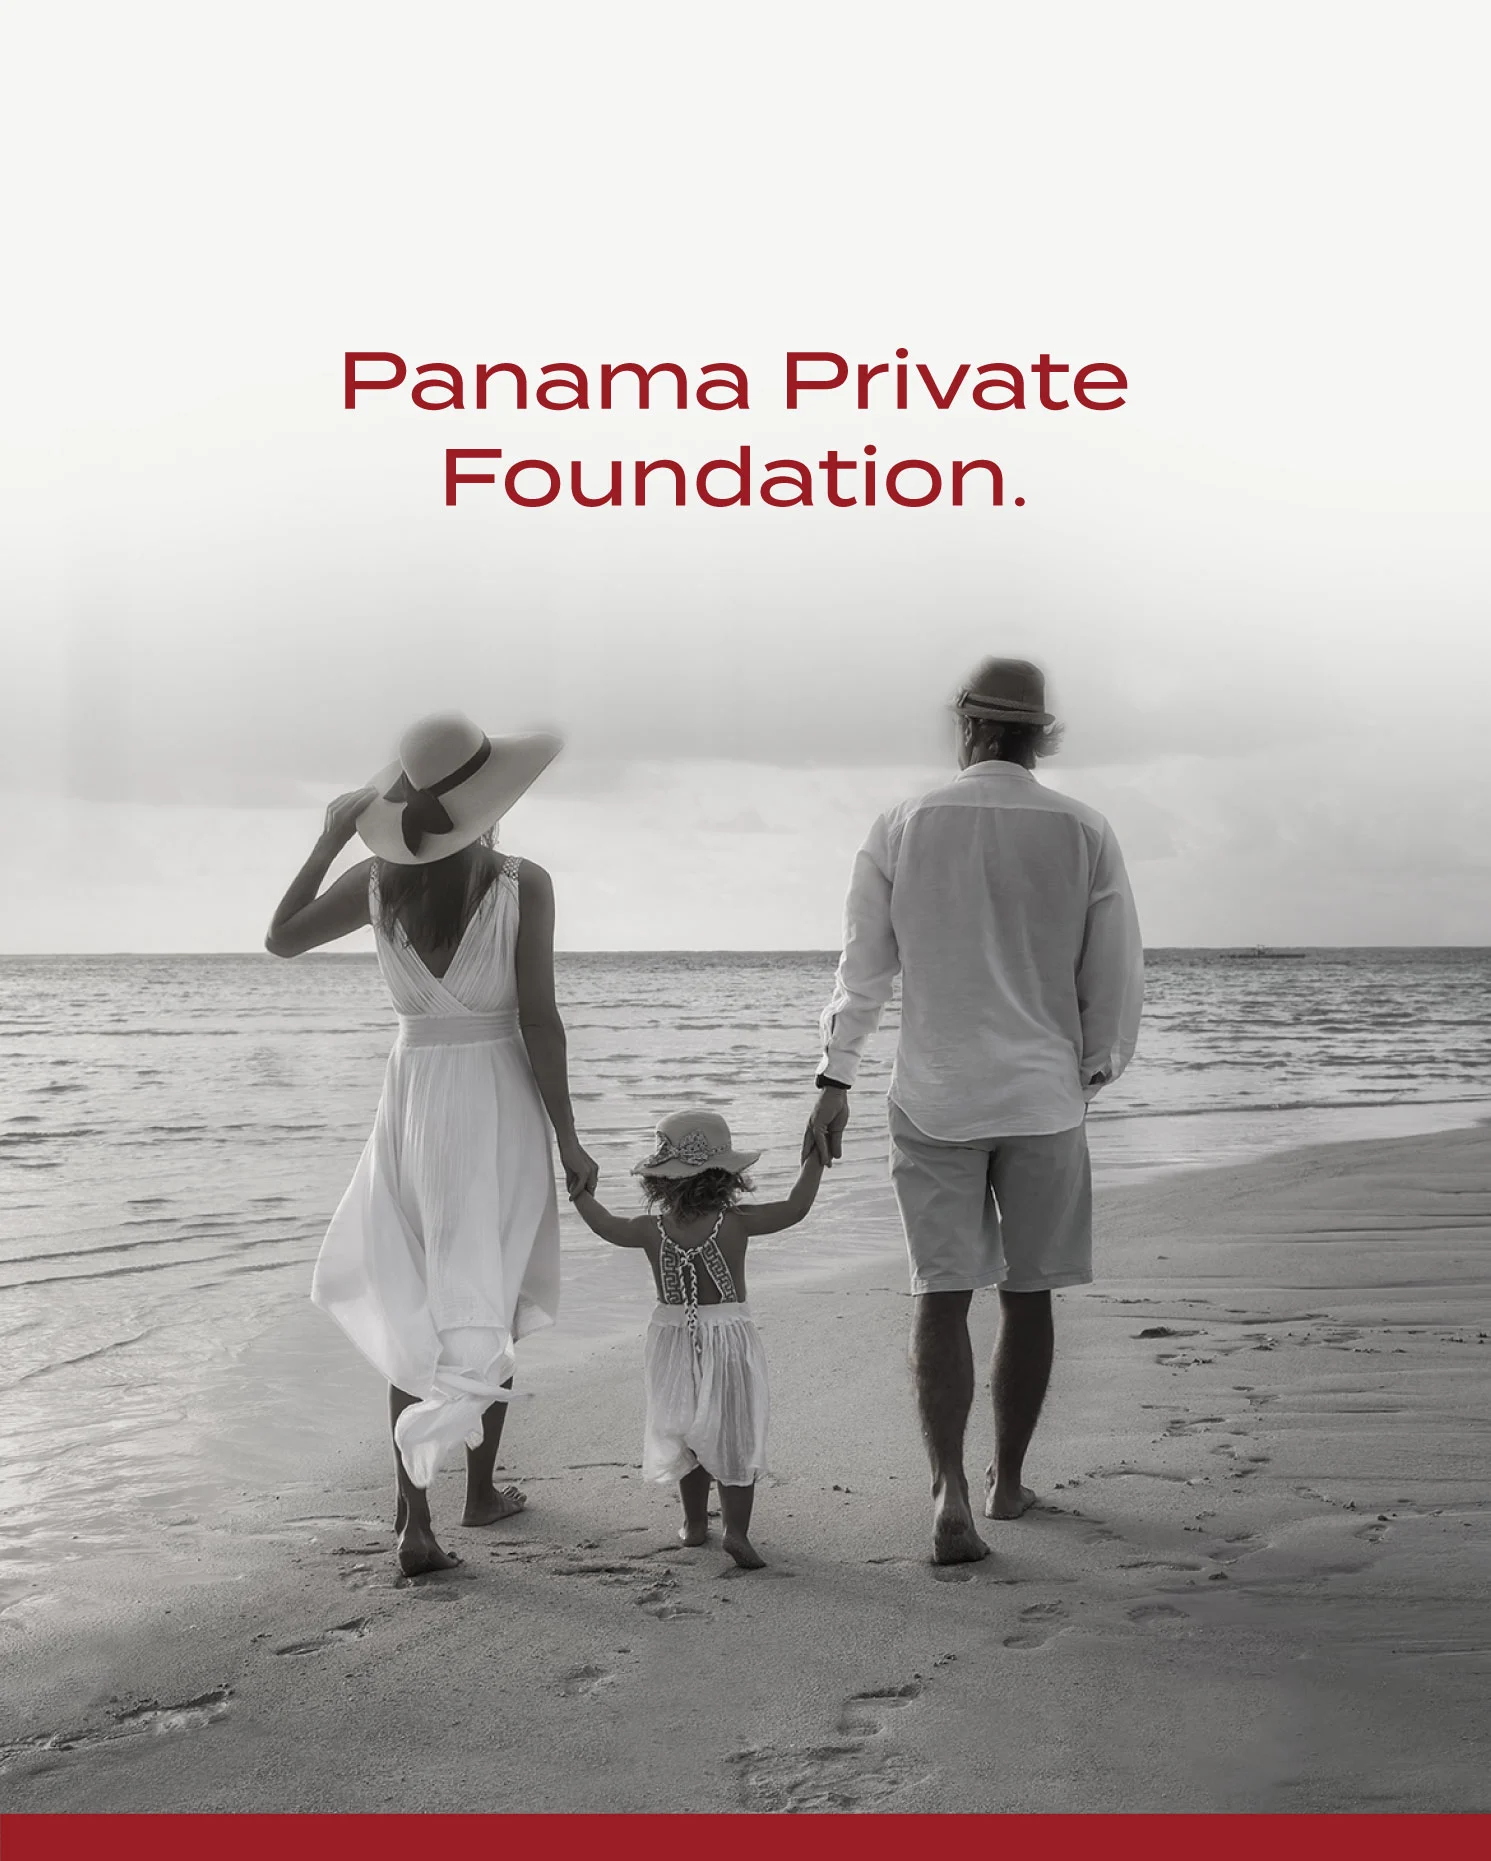 sliders-panama-private-foundation-eng-mobile